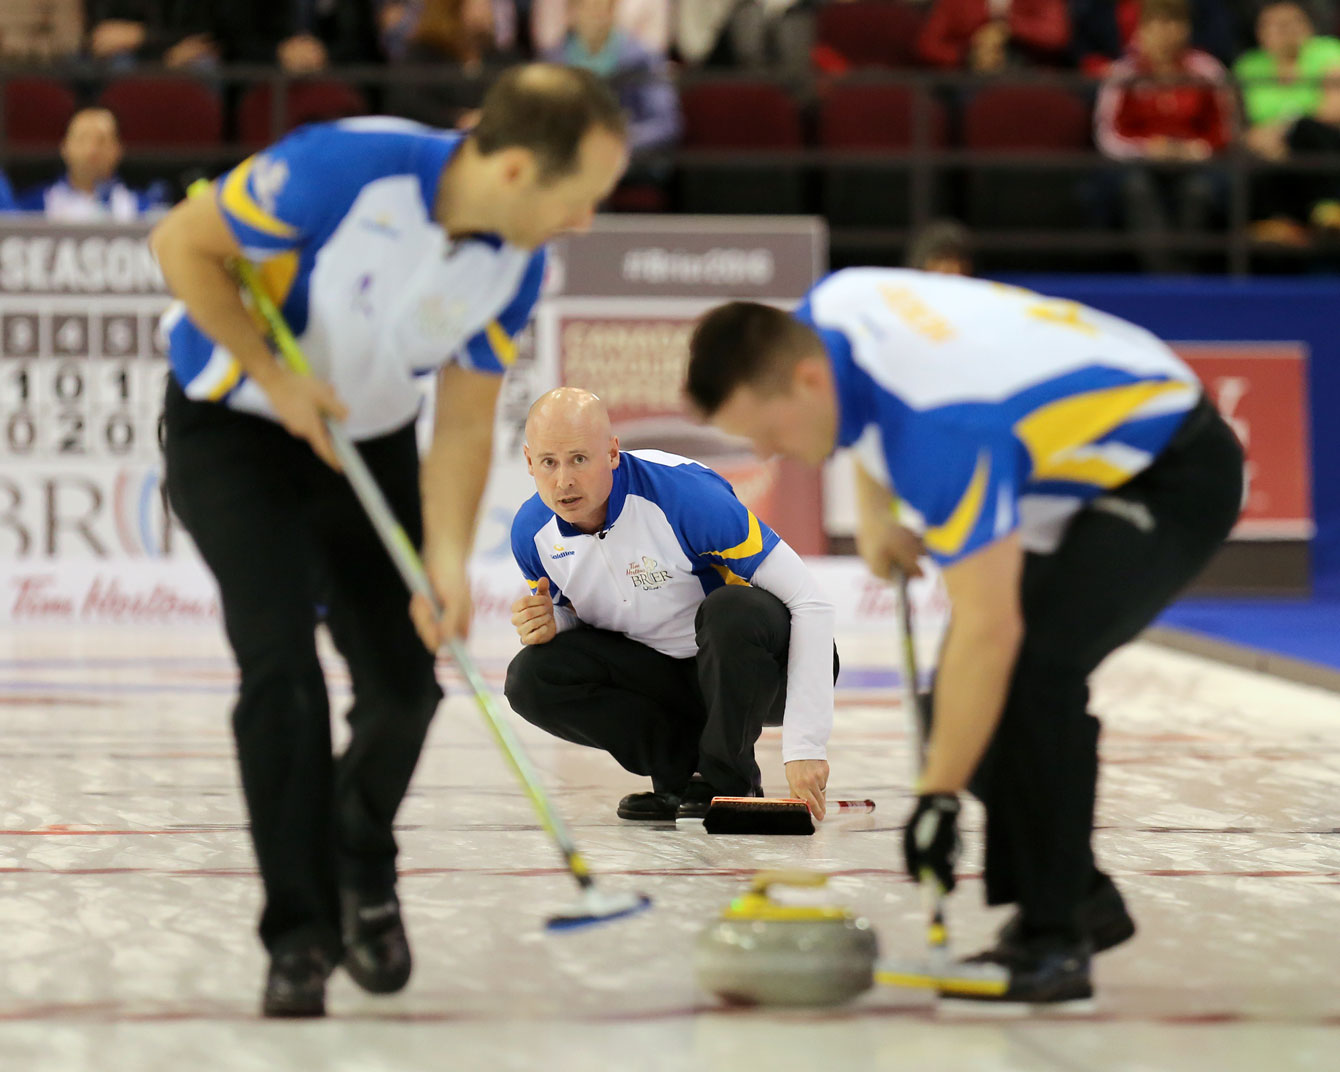 Kevin Koe (centre) guides a shot at the Brier on March 13, 2016 (Photo: Greg Kolz). 